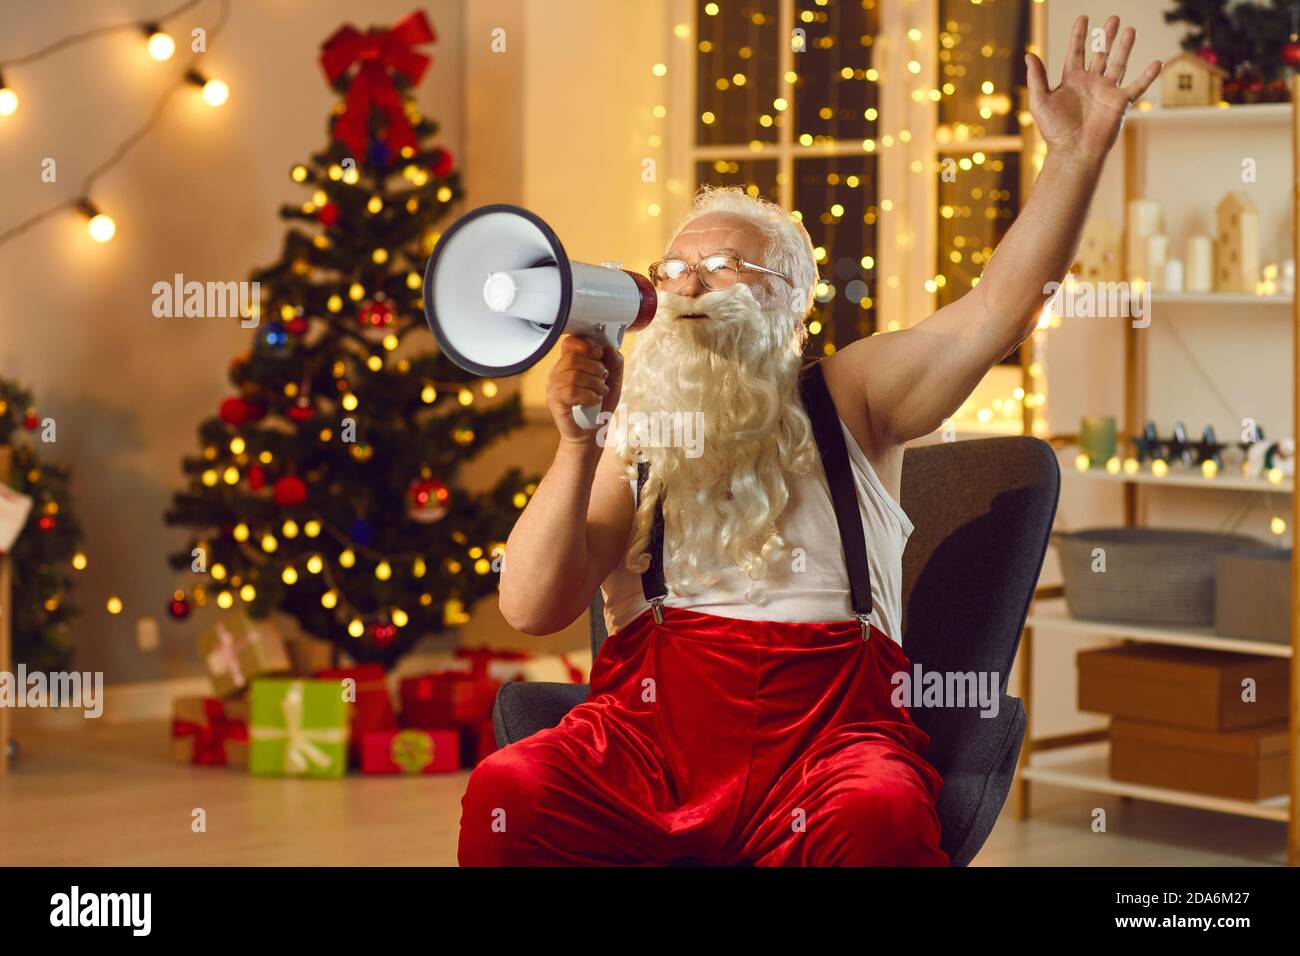 Senior Santa Claus speaks into a loudspeaker while sitting in a room with Christmas decorations. Stock Photo